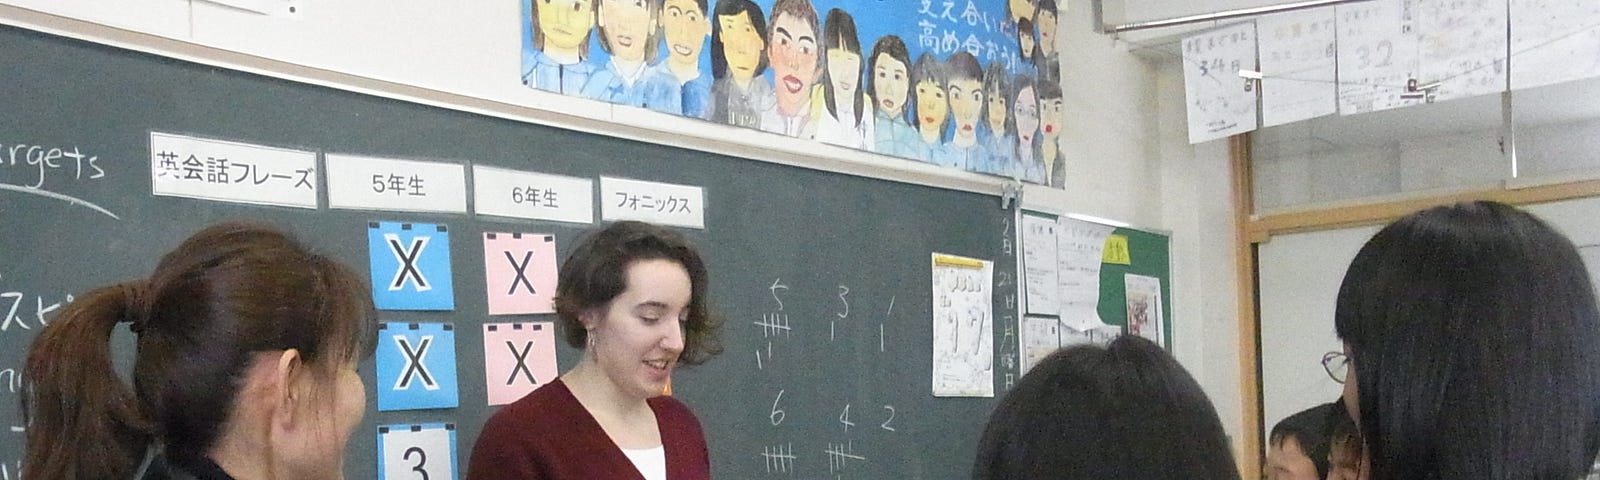 A teacher holds a binder while standing in front of a chalkboard with Japanese writing and Arabic numerals. Five students surround her, engaged with her lesson.